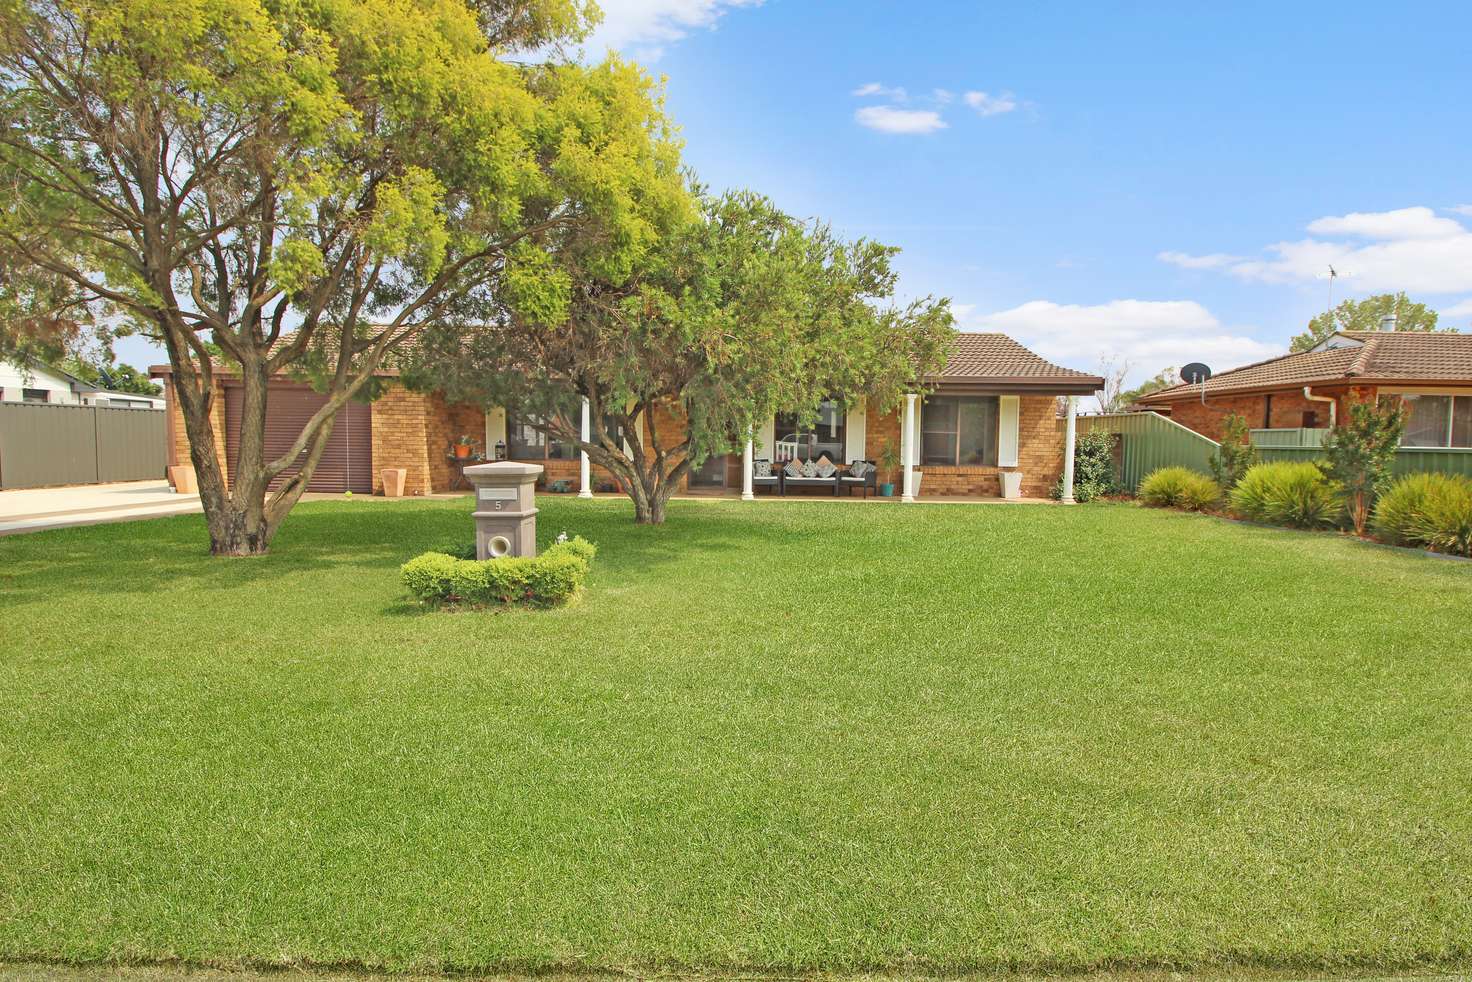 Main view of Homely house listing, 5 Davies St, Scone NSW 2337